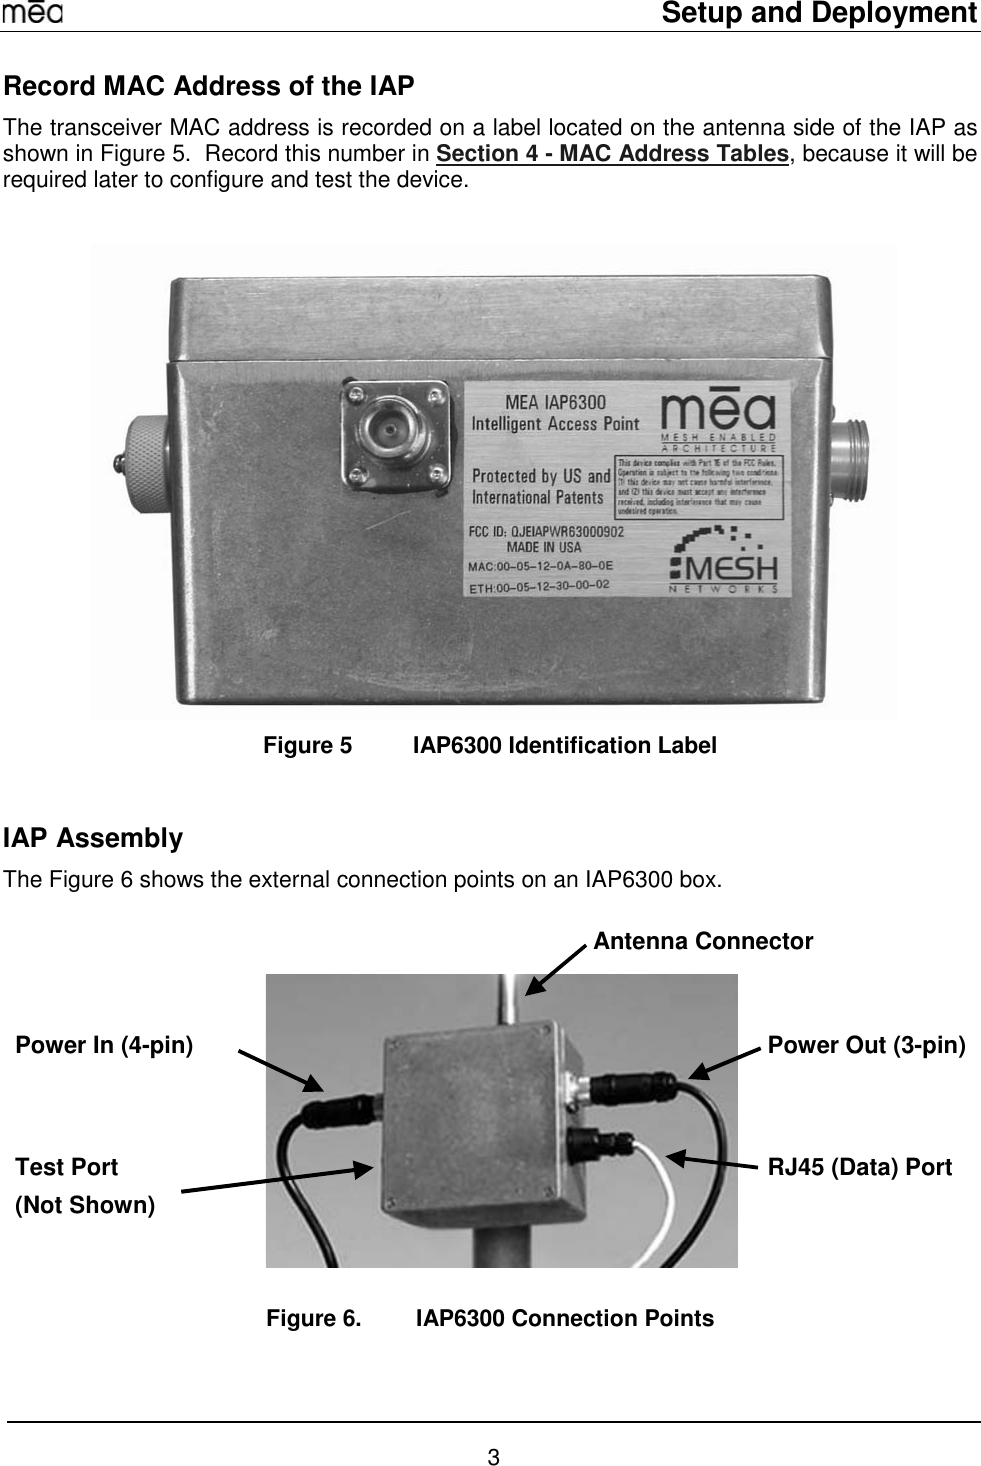     Setup and Deployment  3 Record MAC Address of the IAP The transceiver MAC address is recorded on a label located on the antenna side of the IAP as shown in Figure 5.  Record this number in Section 4 - MAC Address Tables, because it will be required later to configure and test the device.   Figure 5  IAP6300 Identification Label   IAP Assembly The Figure 6 shows the external connection points on an IAP6300 box.  Figure 6.  IAP6300 Connection Points  Antenna Connector Power Out (3-pin)Power In (4-pin) Test Port (Not Shown) RJ45 (Data) Port 